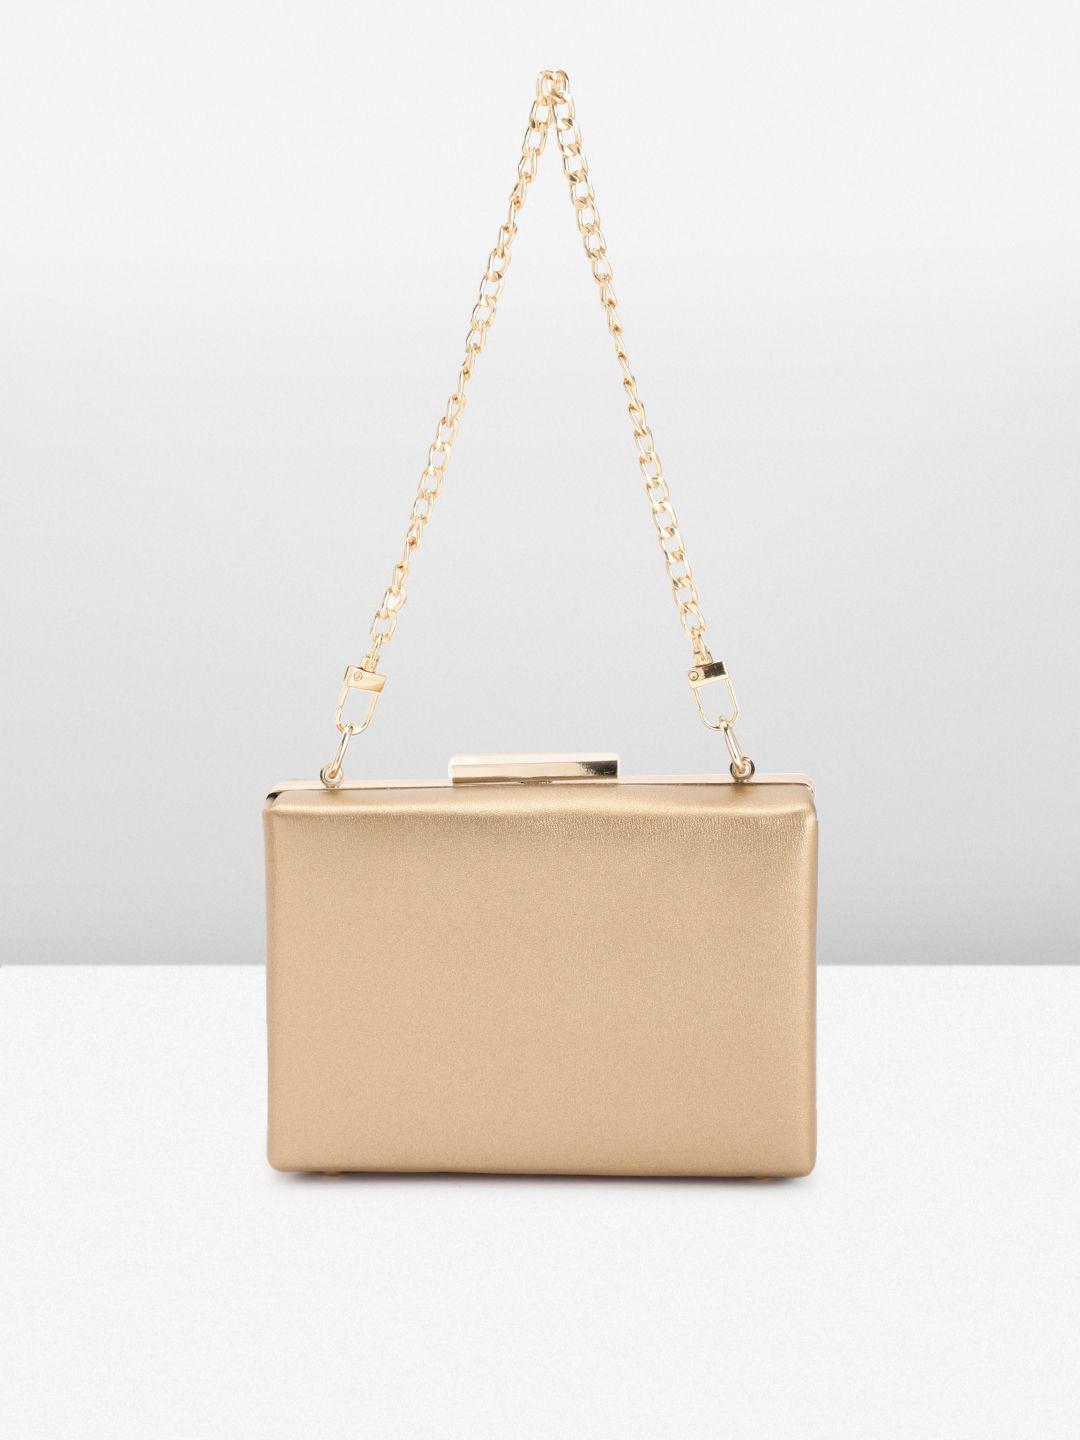 allen solly solid box clutch with shoulder straps